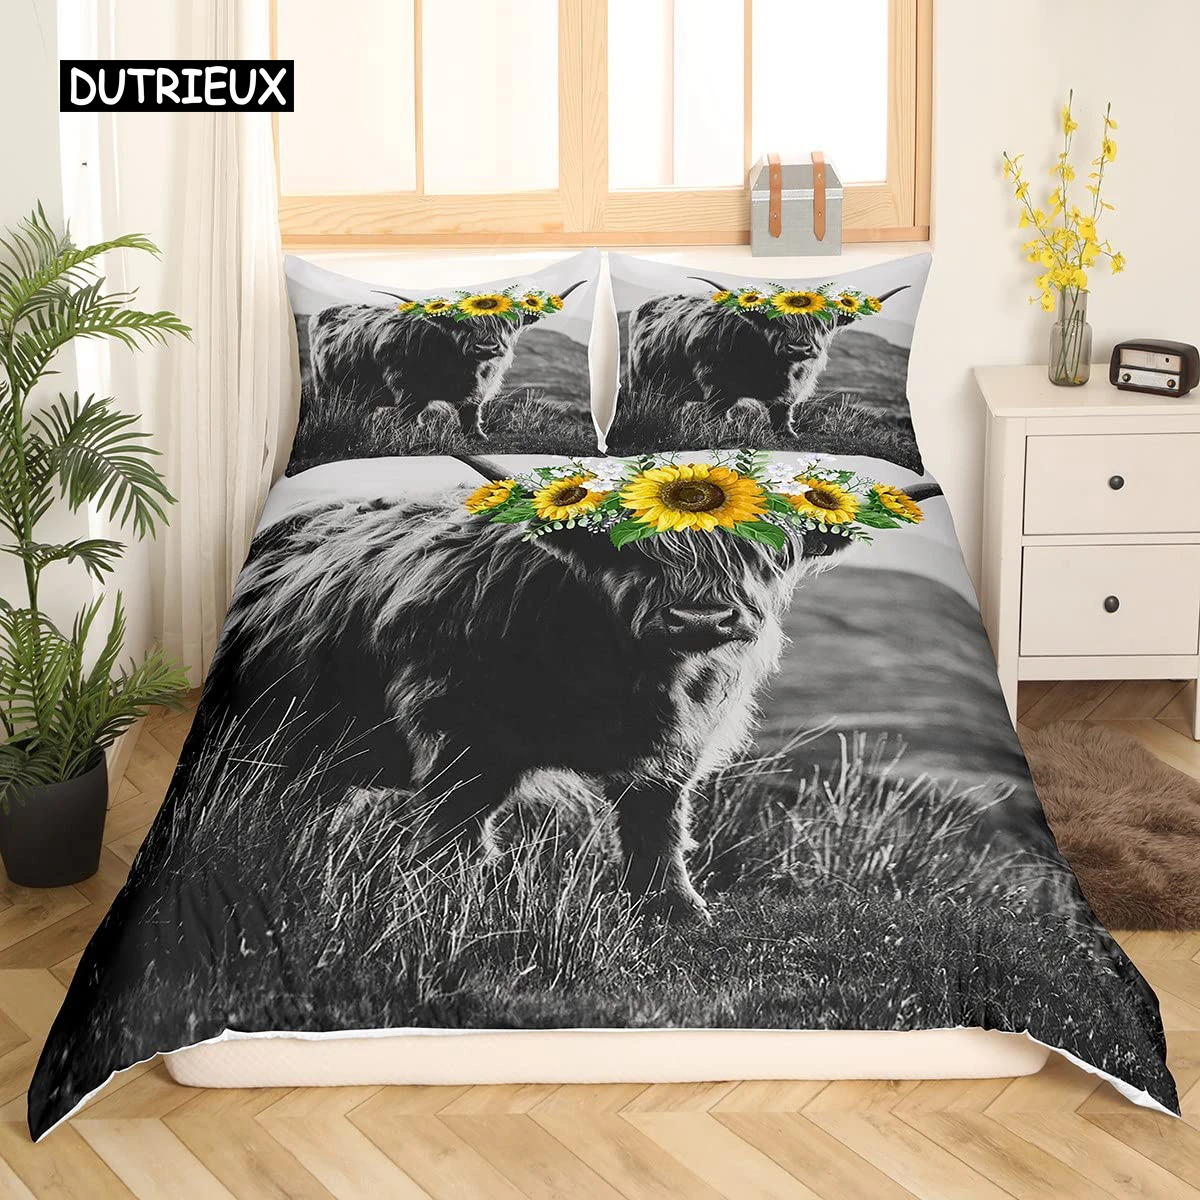 

Highland Cow Duvet Cover Set Twin Size Cattle Flower Bedding Set Yellow Sunflower Western Funny Animal Cow Polyester Quilt Cover